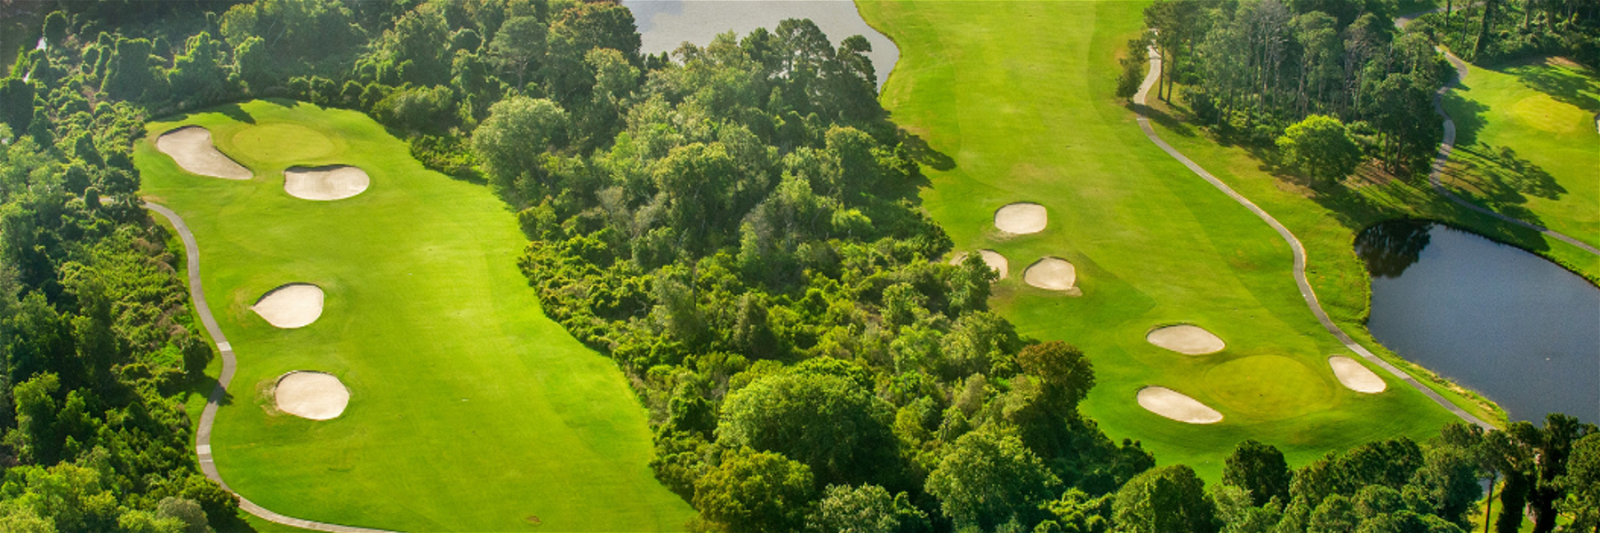 Golf Vacation Package - Jekyll Island Golf - Indian Mound Course